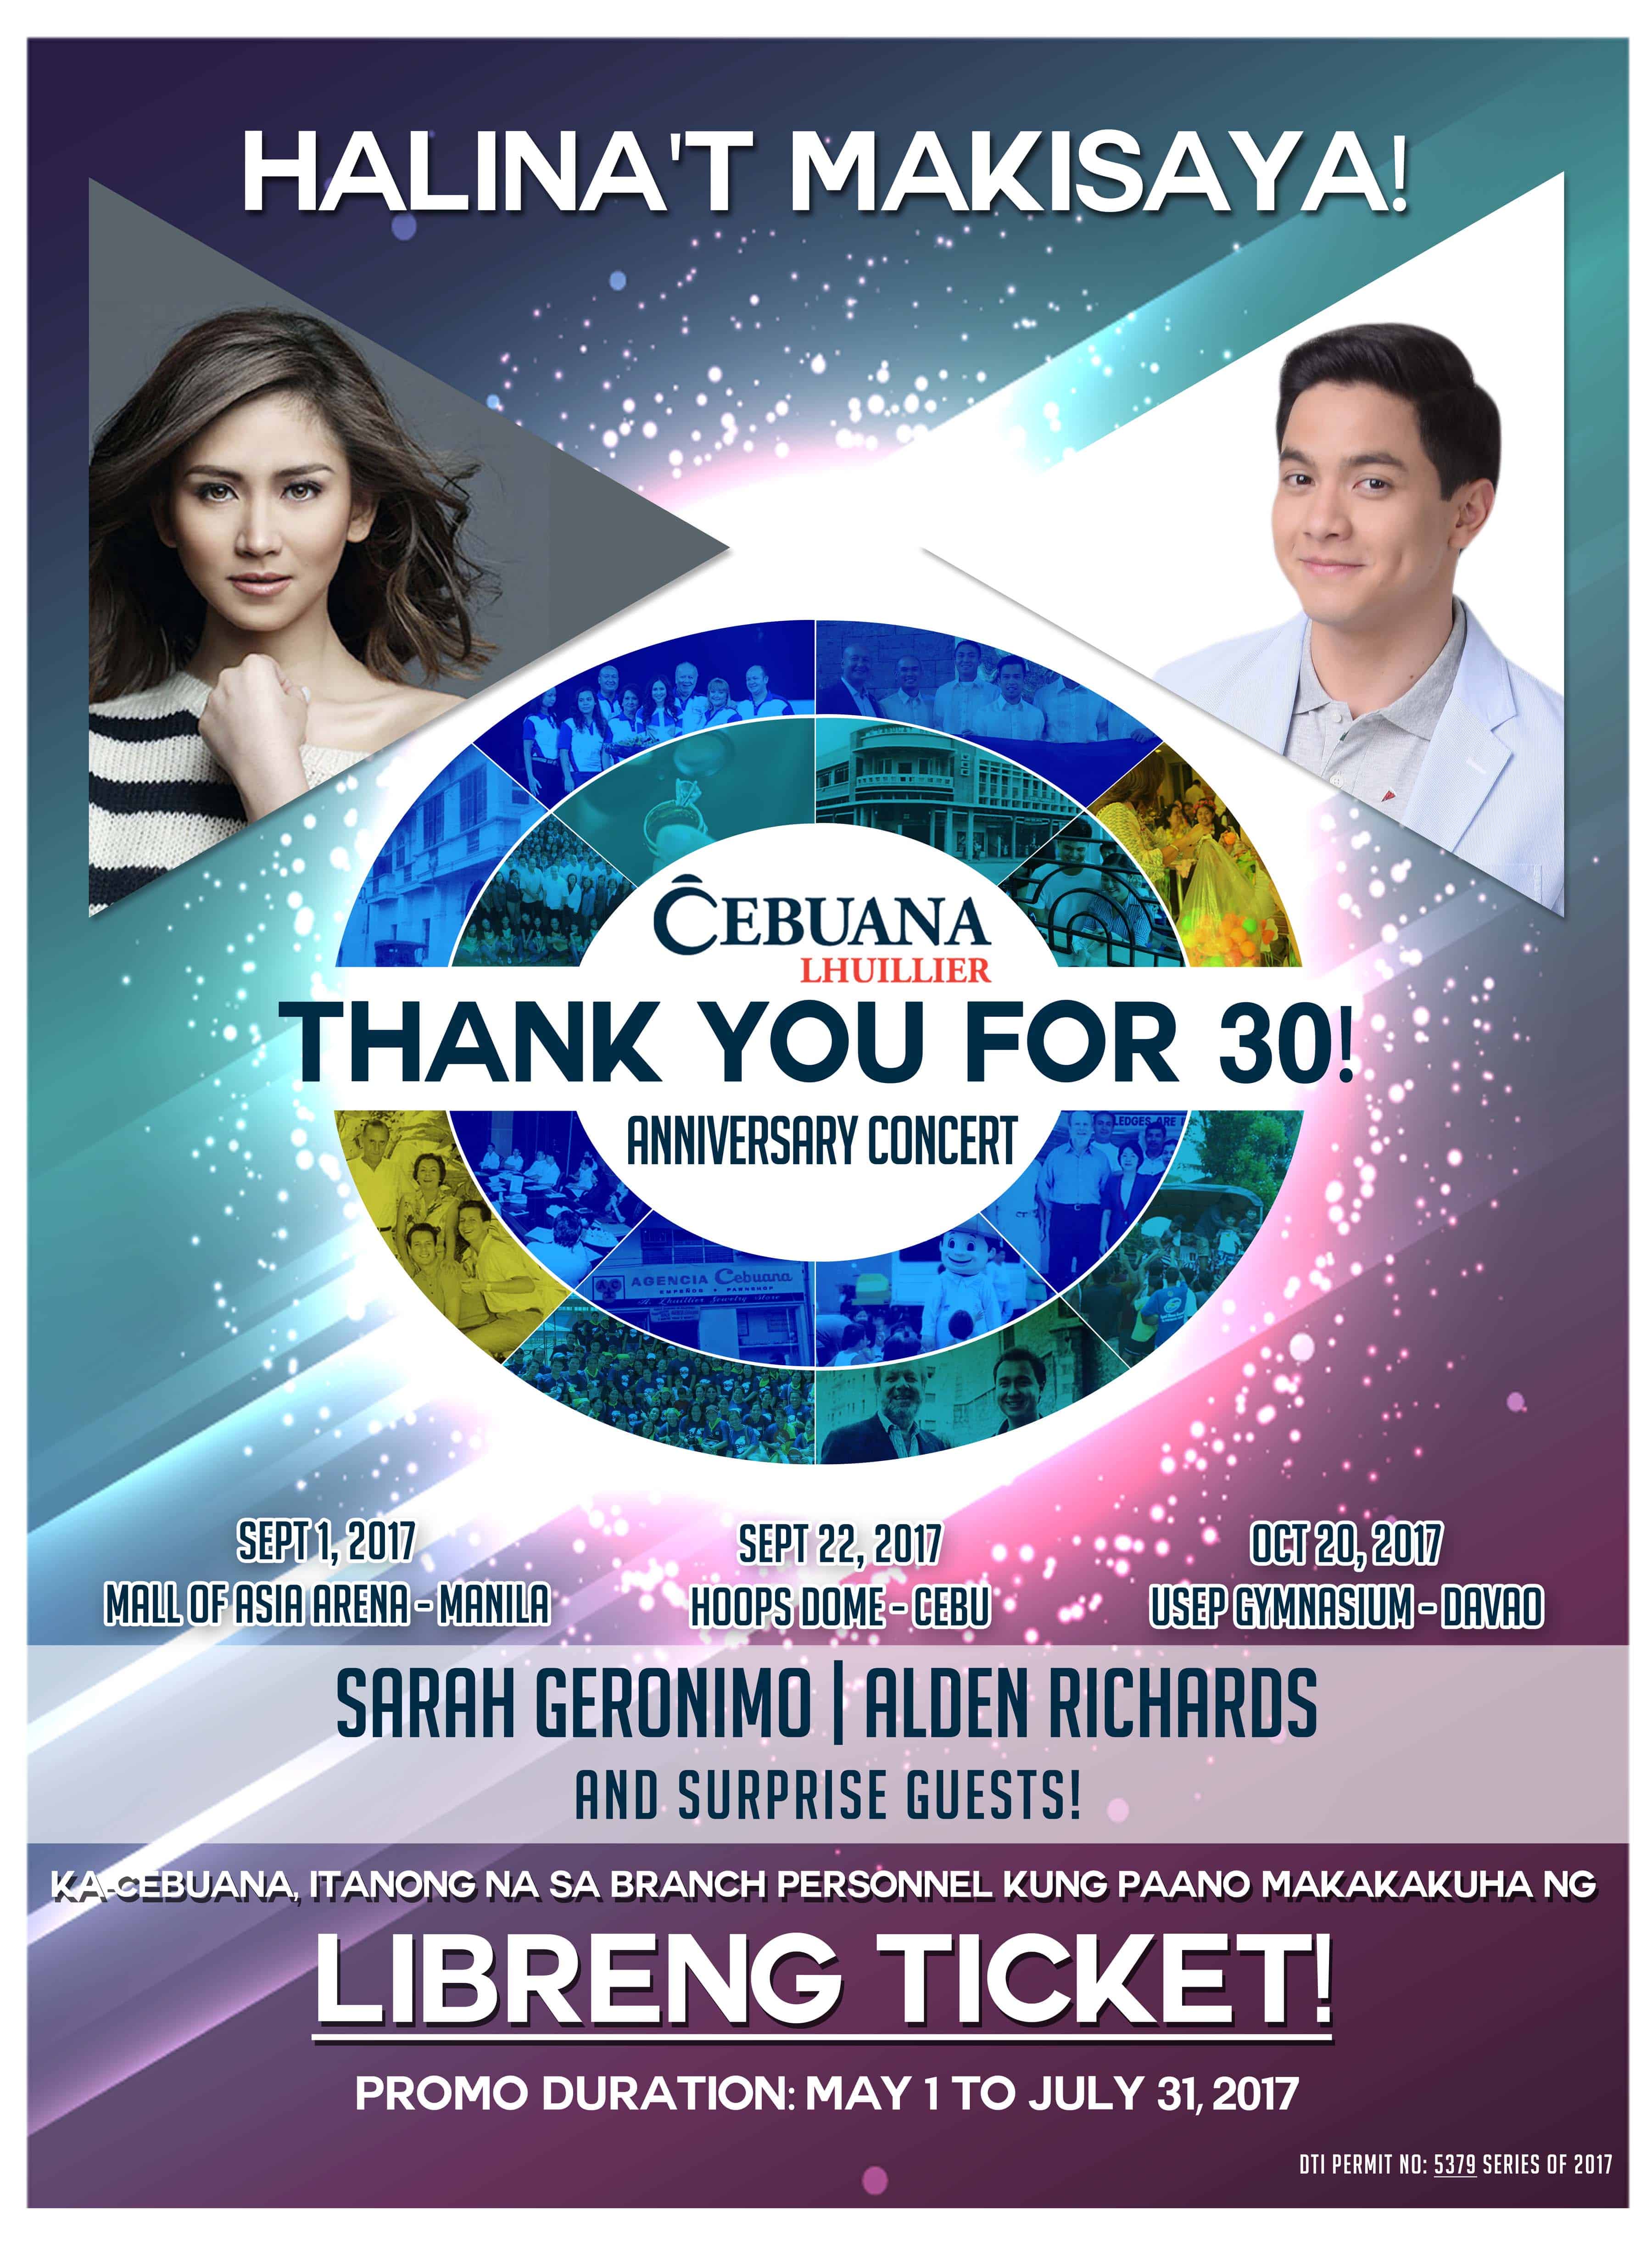 “Thank you for 30!”, the Cebuana Lhuillier Anniversary Concert series